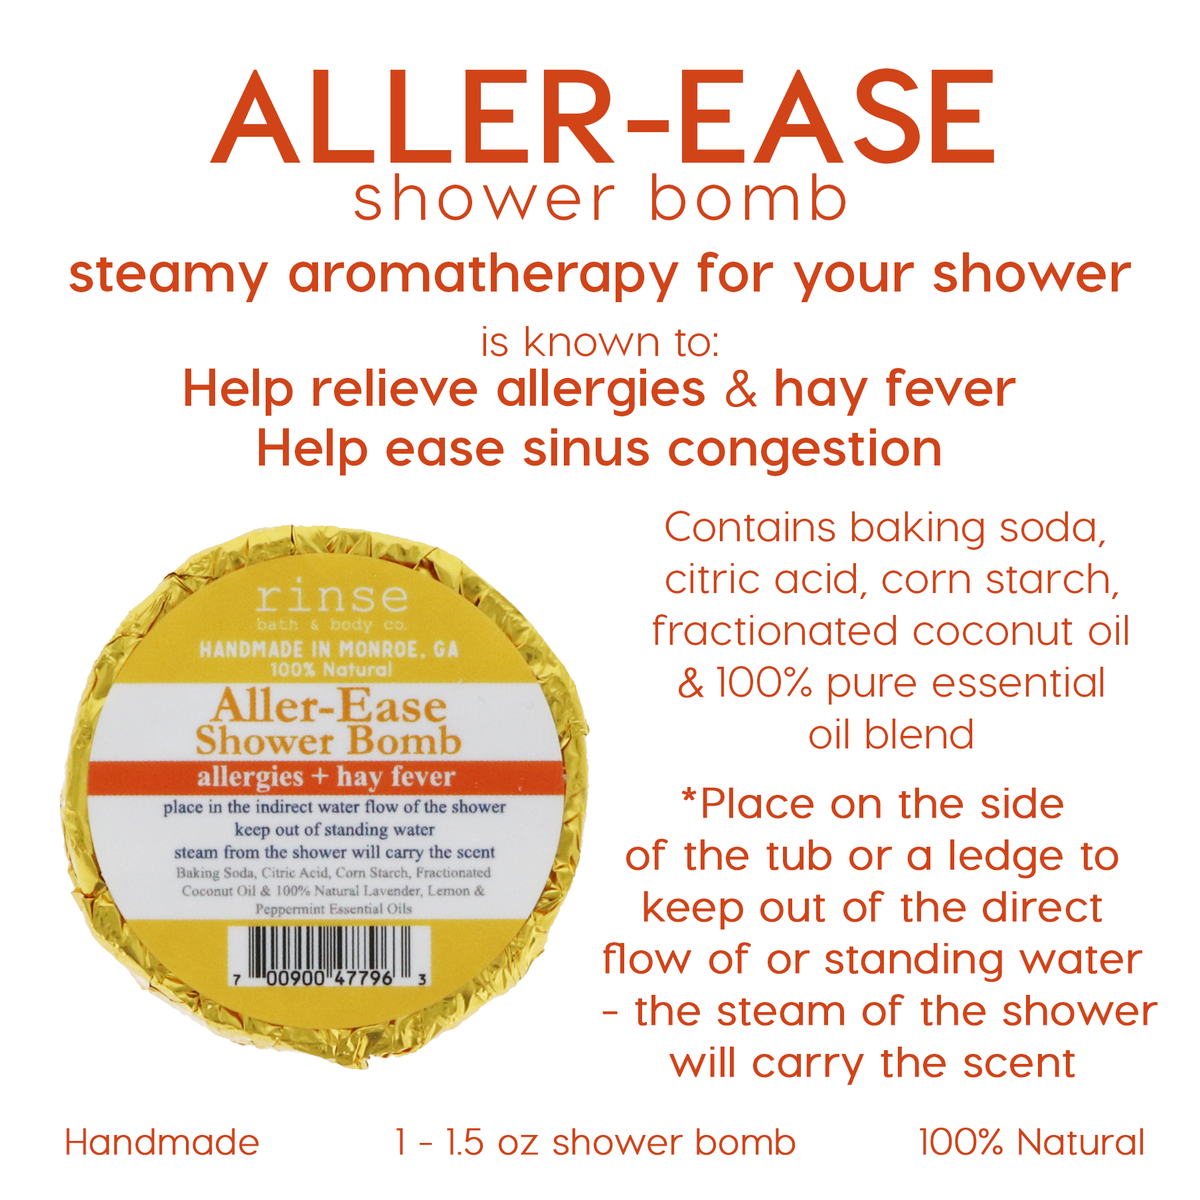 Directions and ingredients for Aller-Ease shower bombs